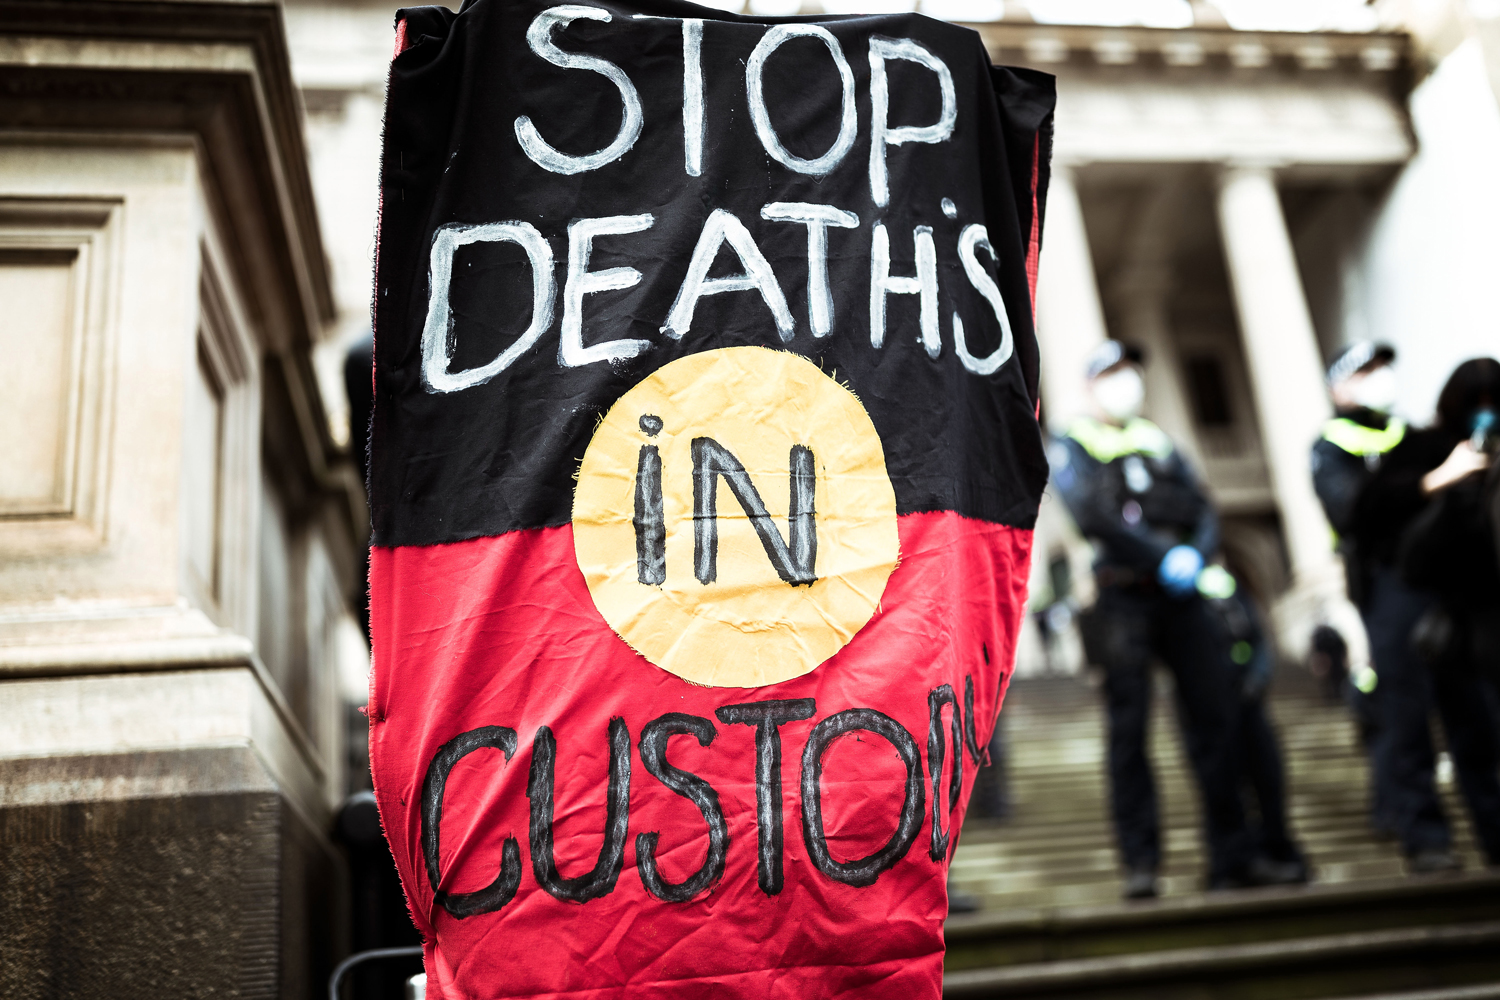 In 3 Weeks There Have Been 4 Aboriginal Deaths In Custody, Yet Where Is the National Outrage?